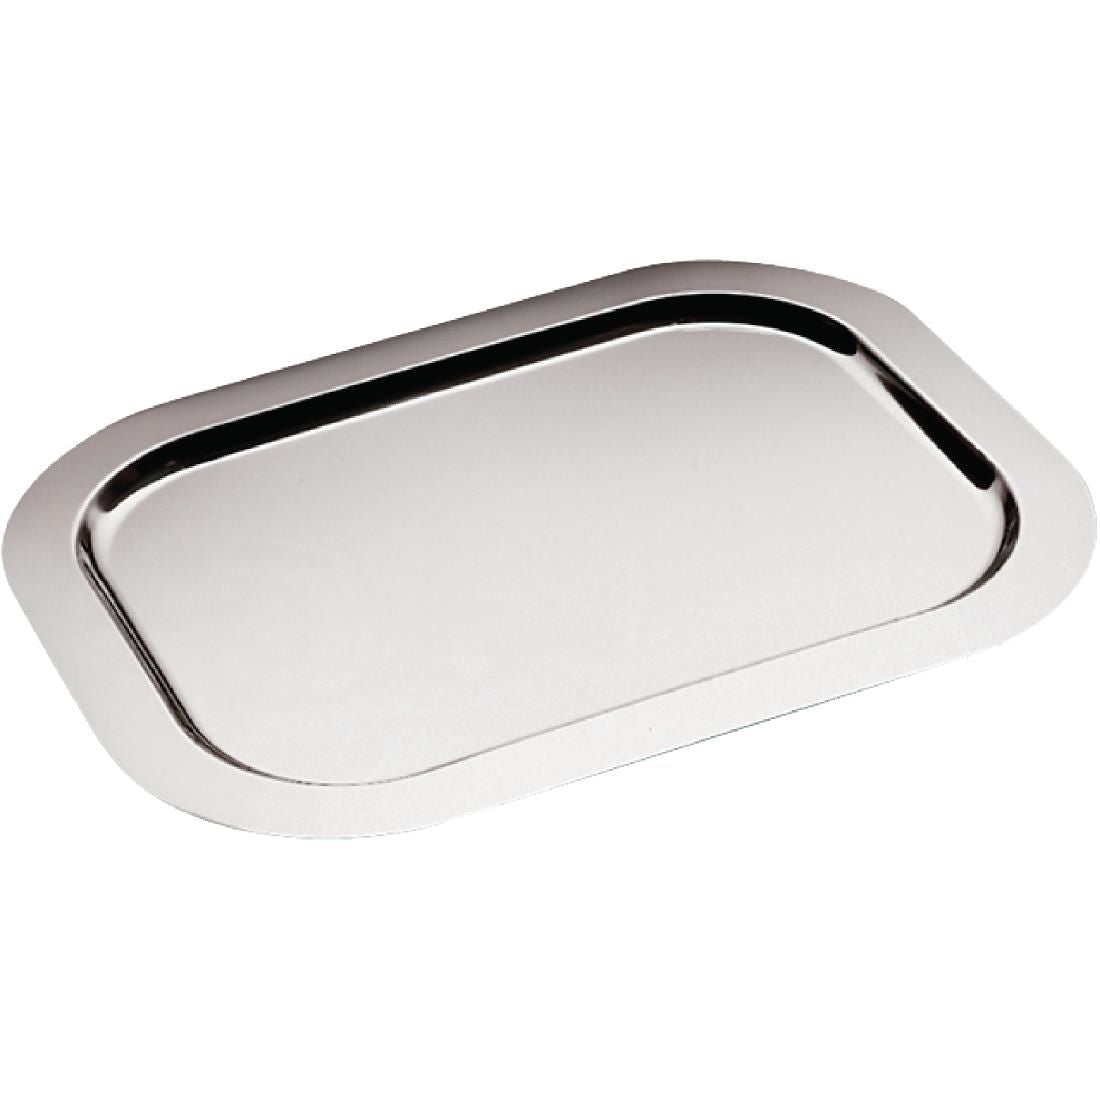 APS Large Stainless Steel Service Tray 580mm JD Catering Equipment Solutions Ltd